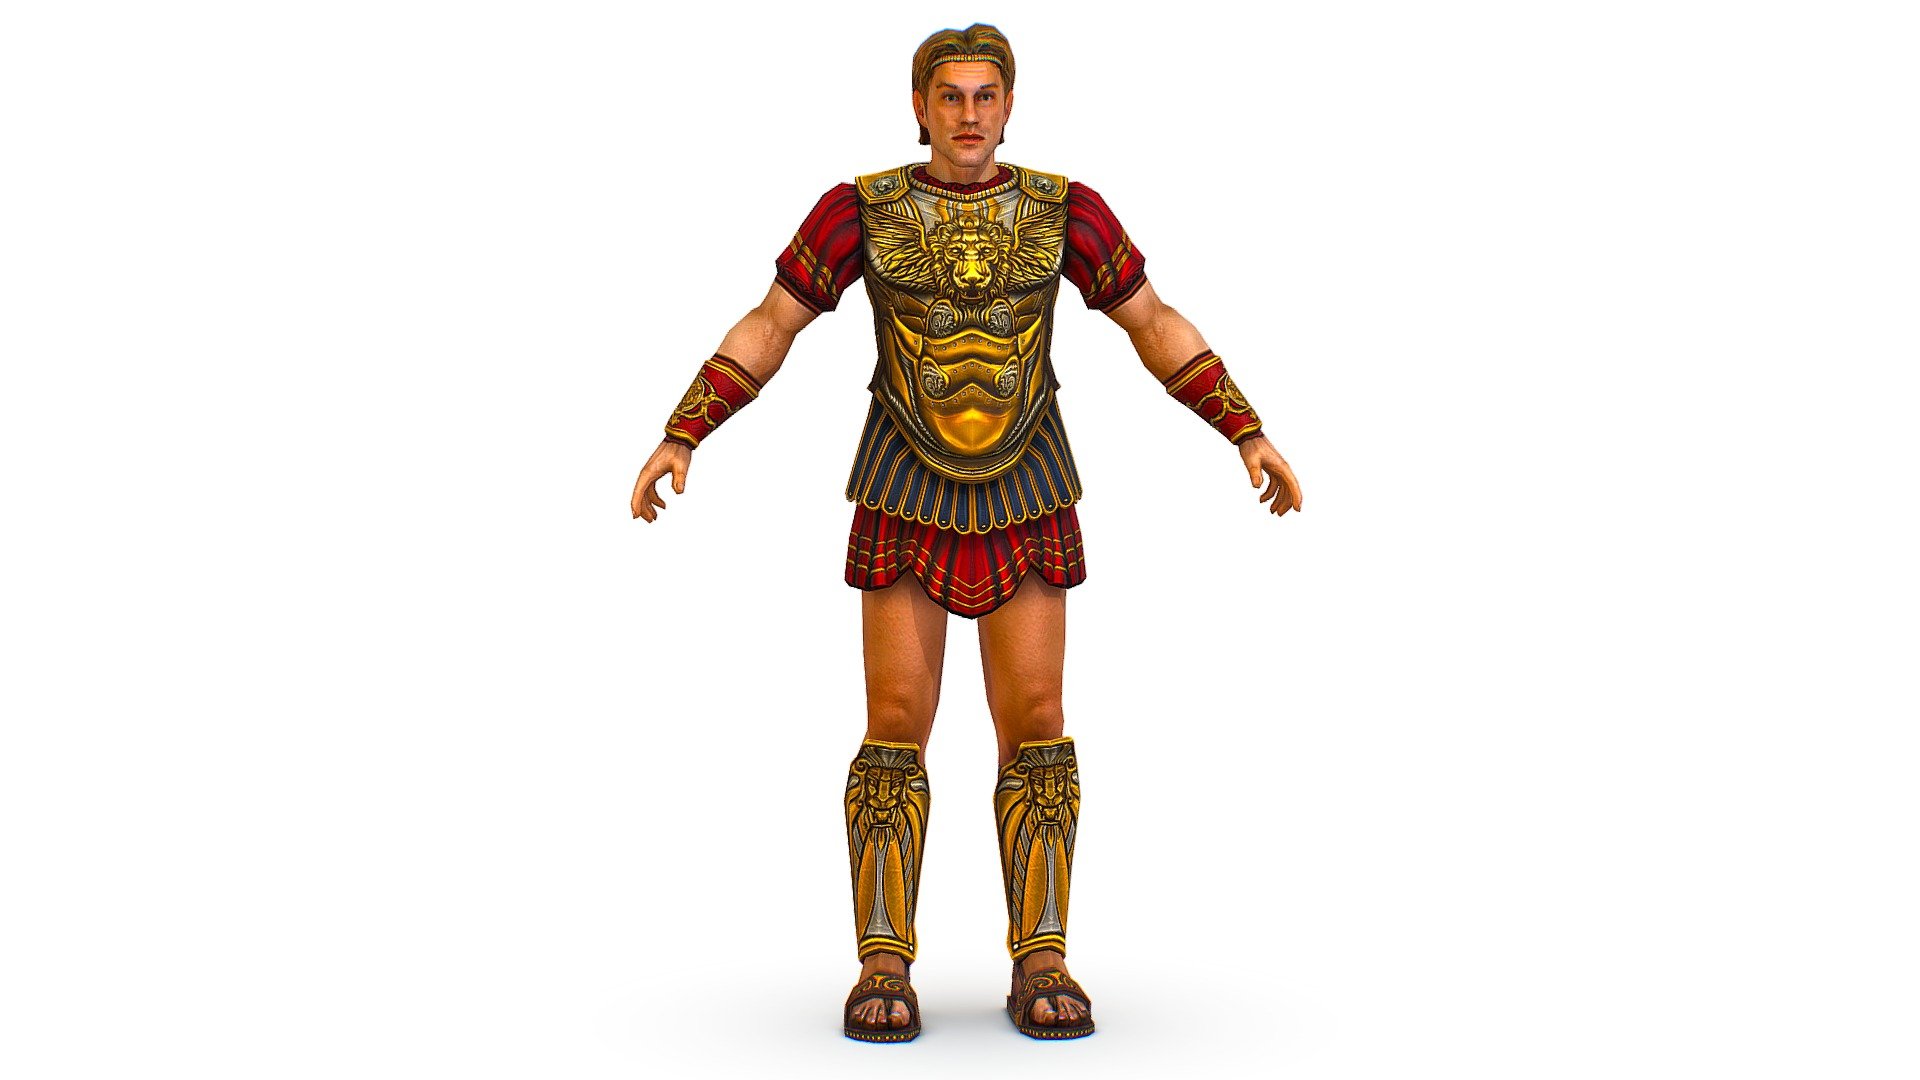 An ancient warrior in gold armor and a red shirt - 3dsMax file included/ texture 1024 color only 3d model